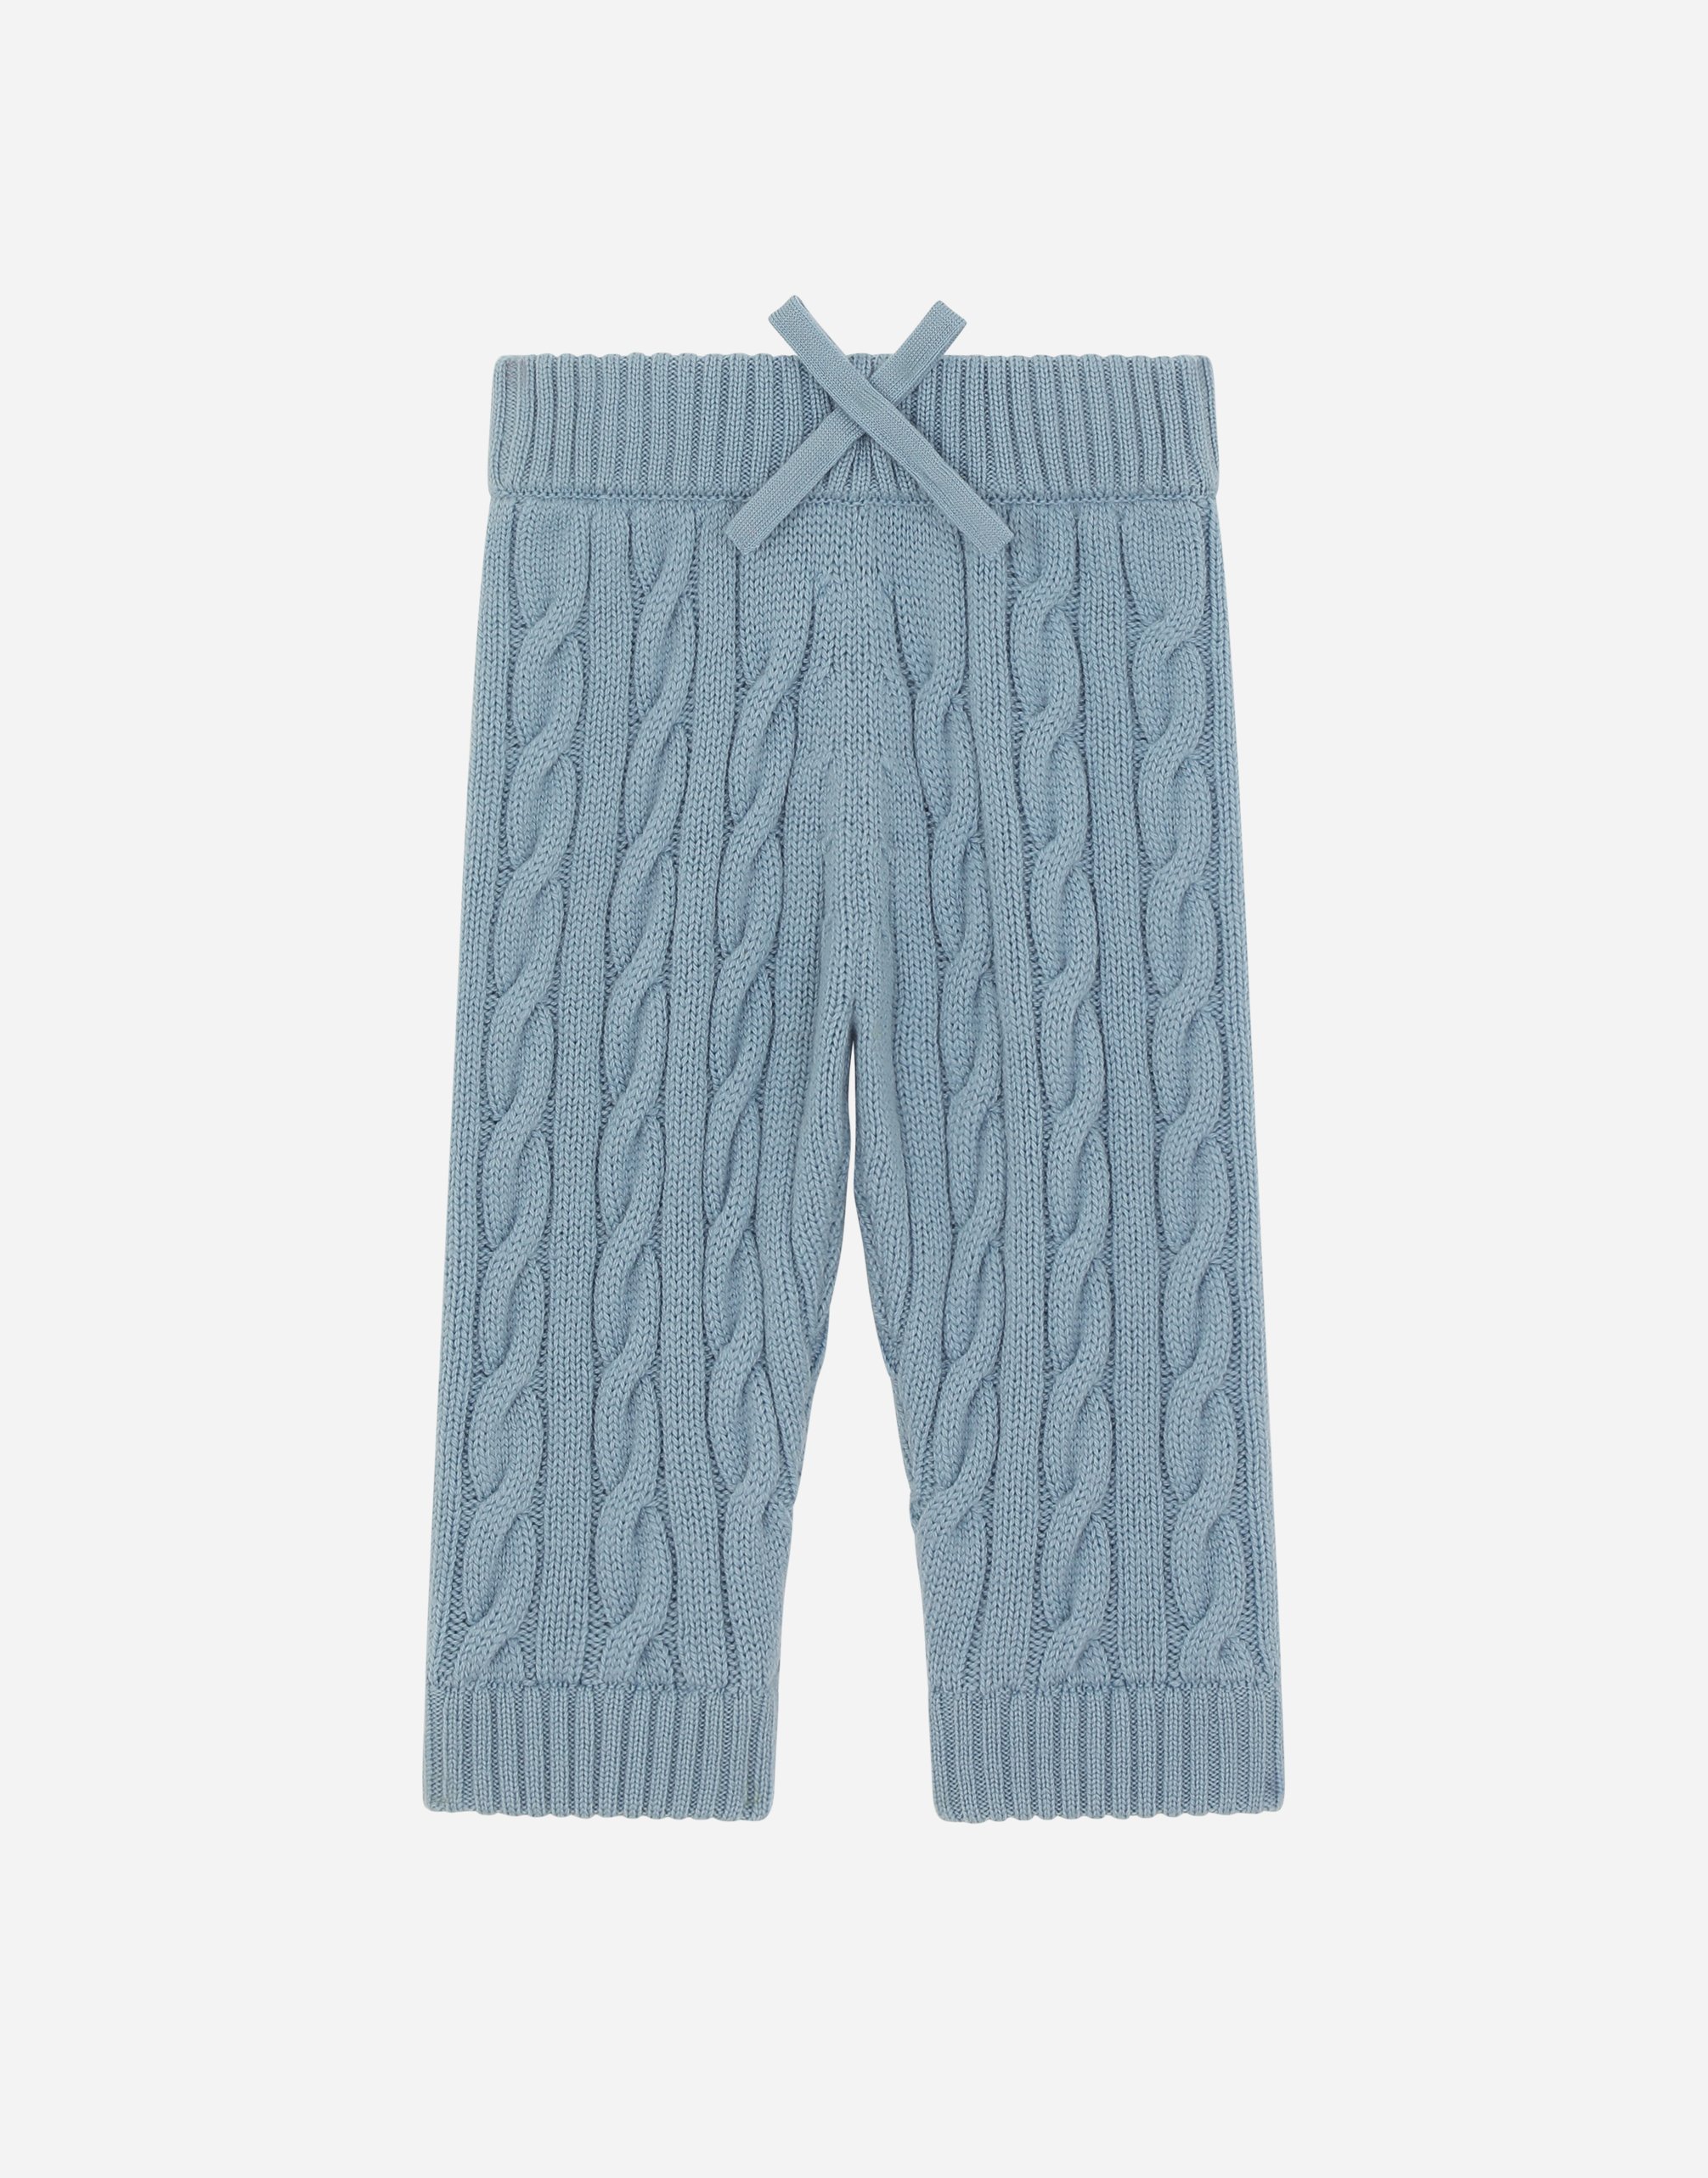 Cable-knit pants with DG logo patch in Azure